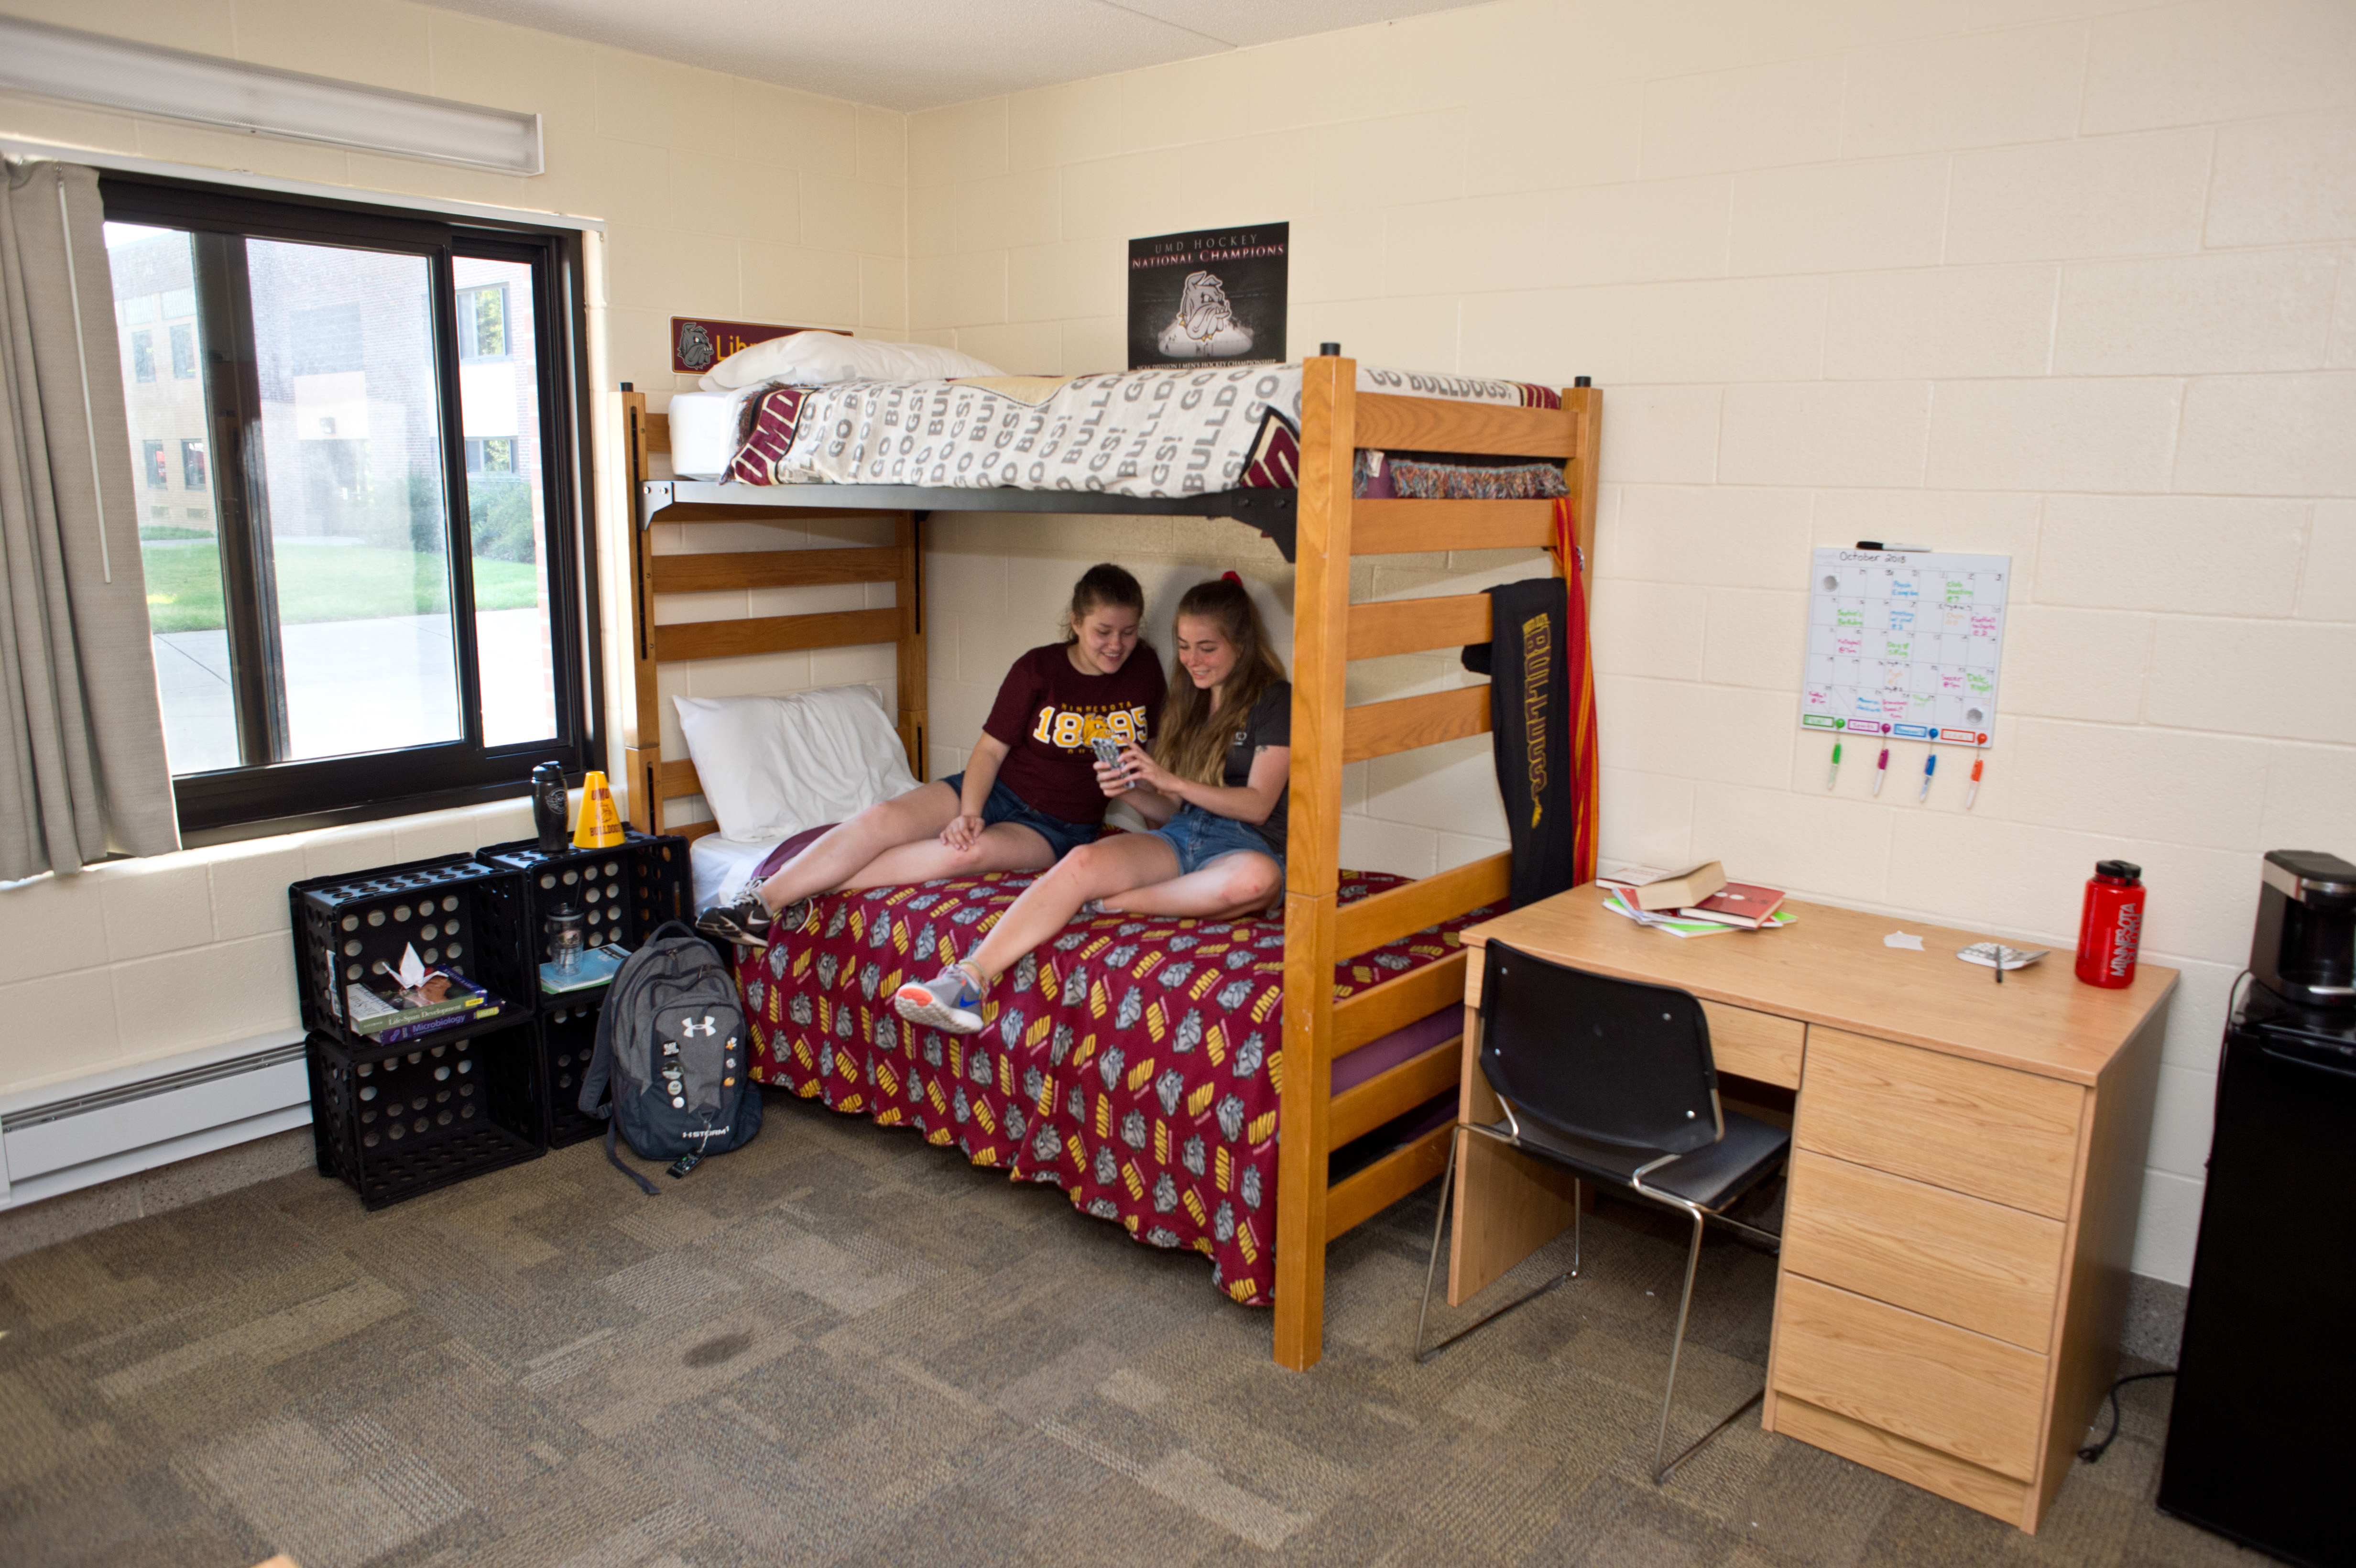 Two students on a bed in a dorm room.